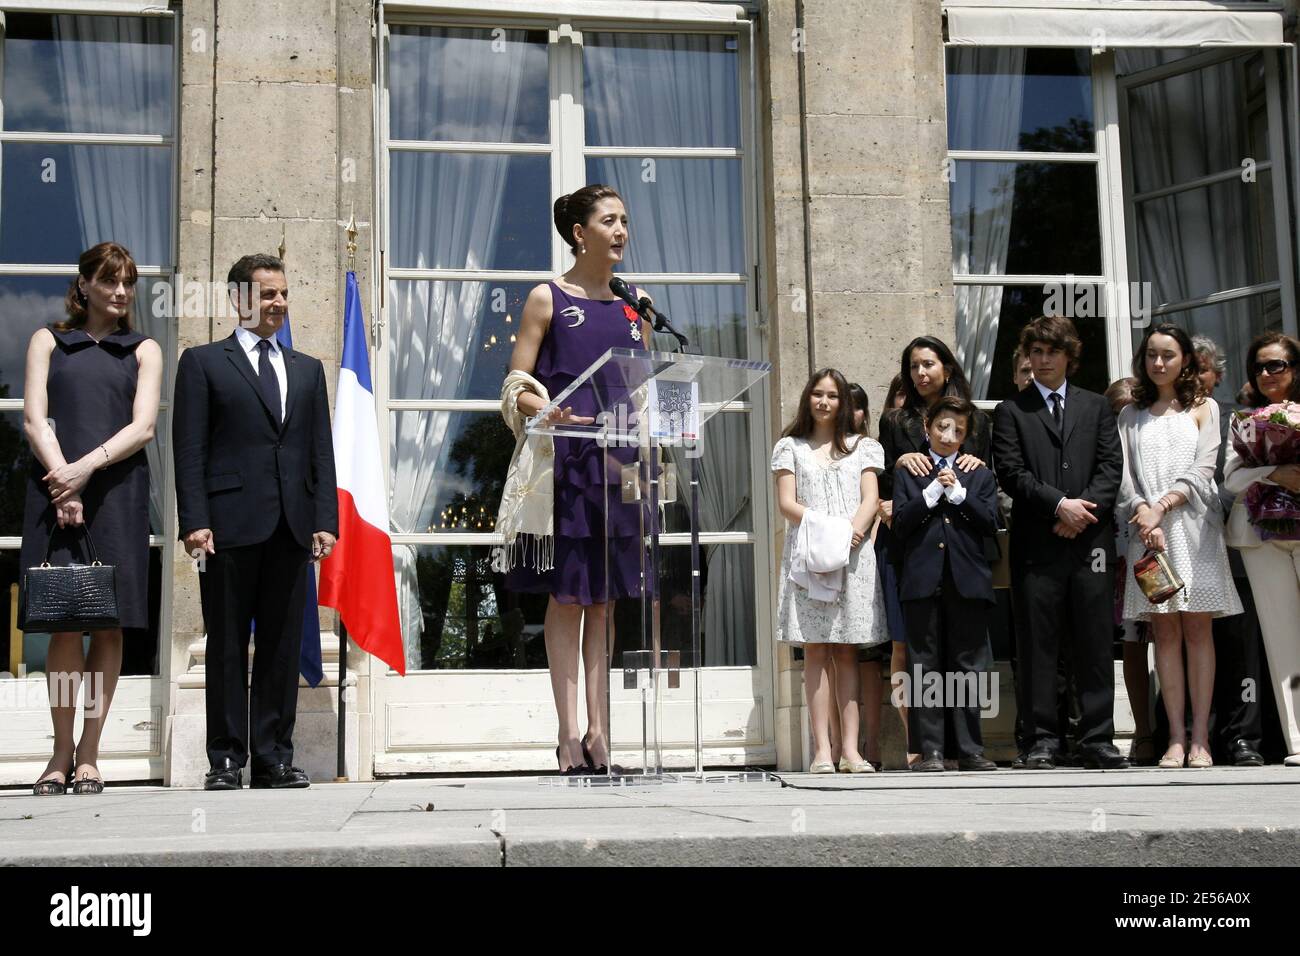 Former Franco-Colombian hostage Ingrid Betancourt reacts near French First Lady Carla Bruni-Sarkozy and President Nicolas Sarkozy and her family ( her niece Anastasia, her nephew Stanislas, her sister Astrid Betancourt, her son Lorenzo Delloye, her daughter Melanie Delloye and her mother Yolanda Pulecio after being awarded with the Legion of Honor by French President Nicolas Sarkozy during the July 14th traditional Garden Party at the Elysee Palace in Paris, France on July 14, 2008. Photo by Benainous-Hounsfield/Pool/ABACAPRESS.COM Stock Photo